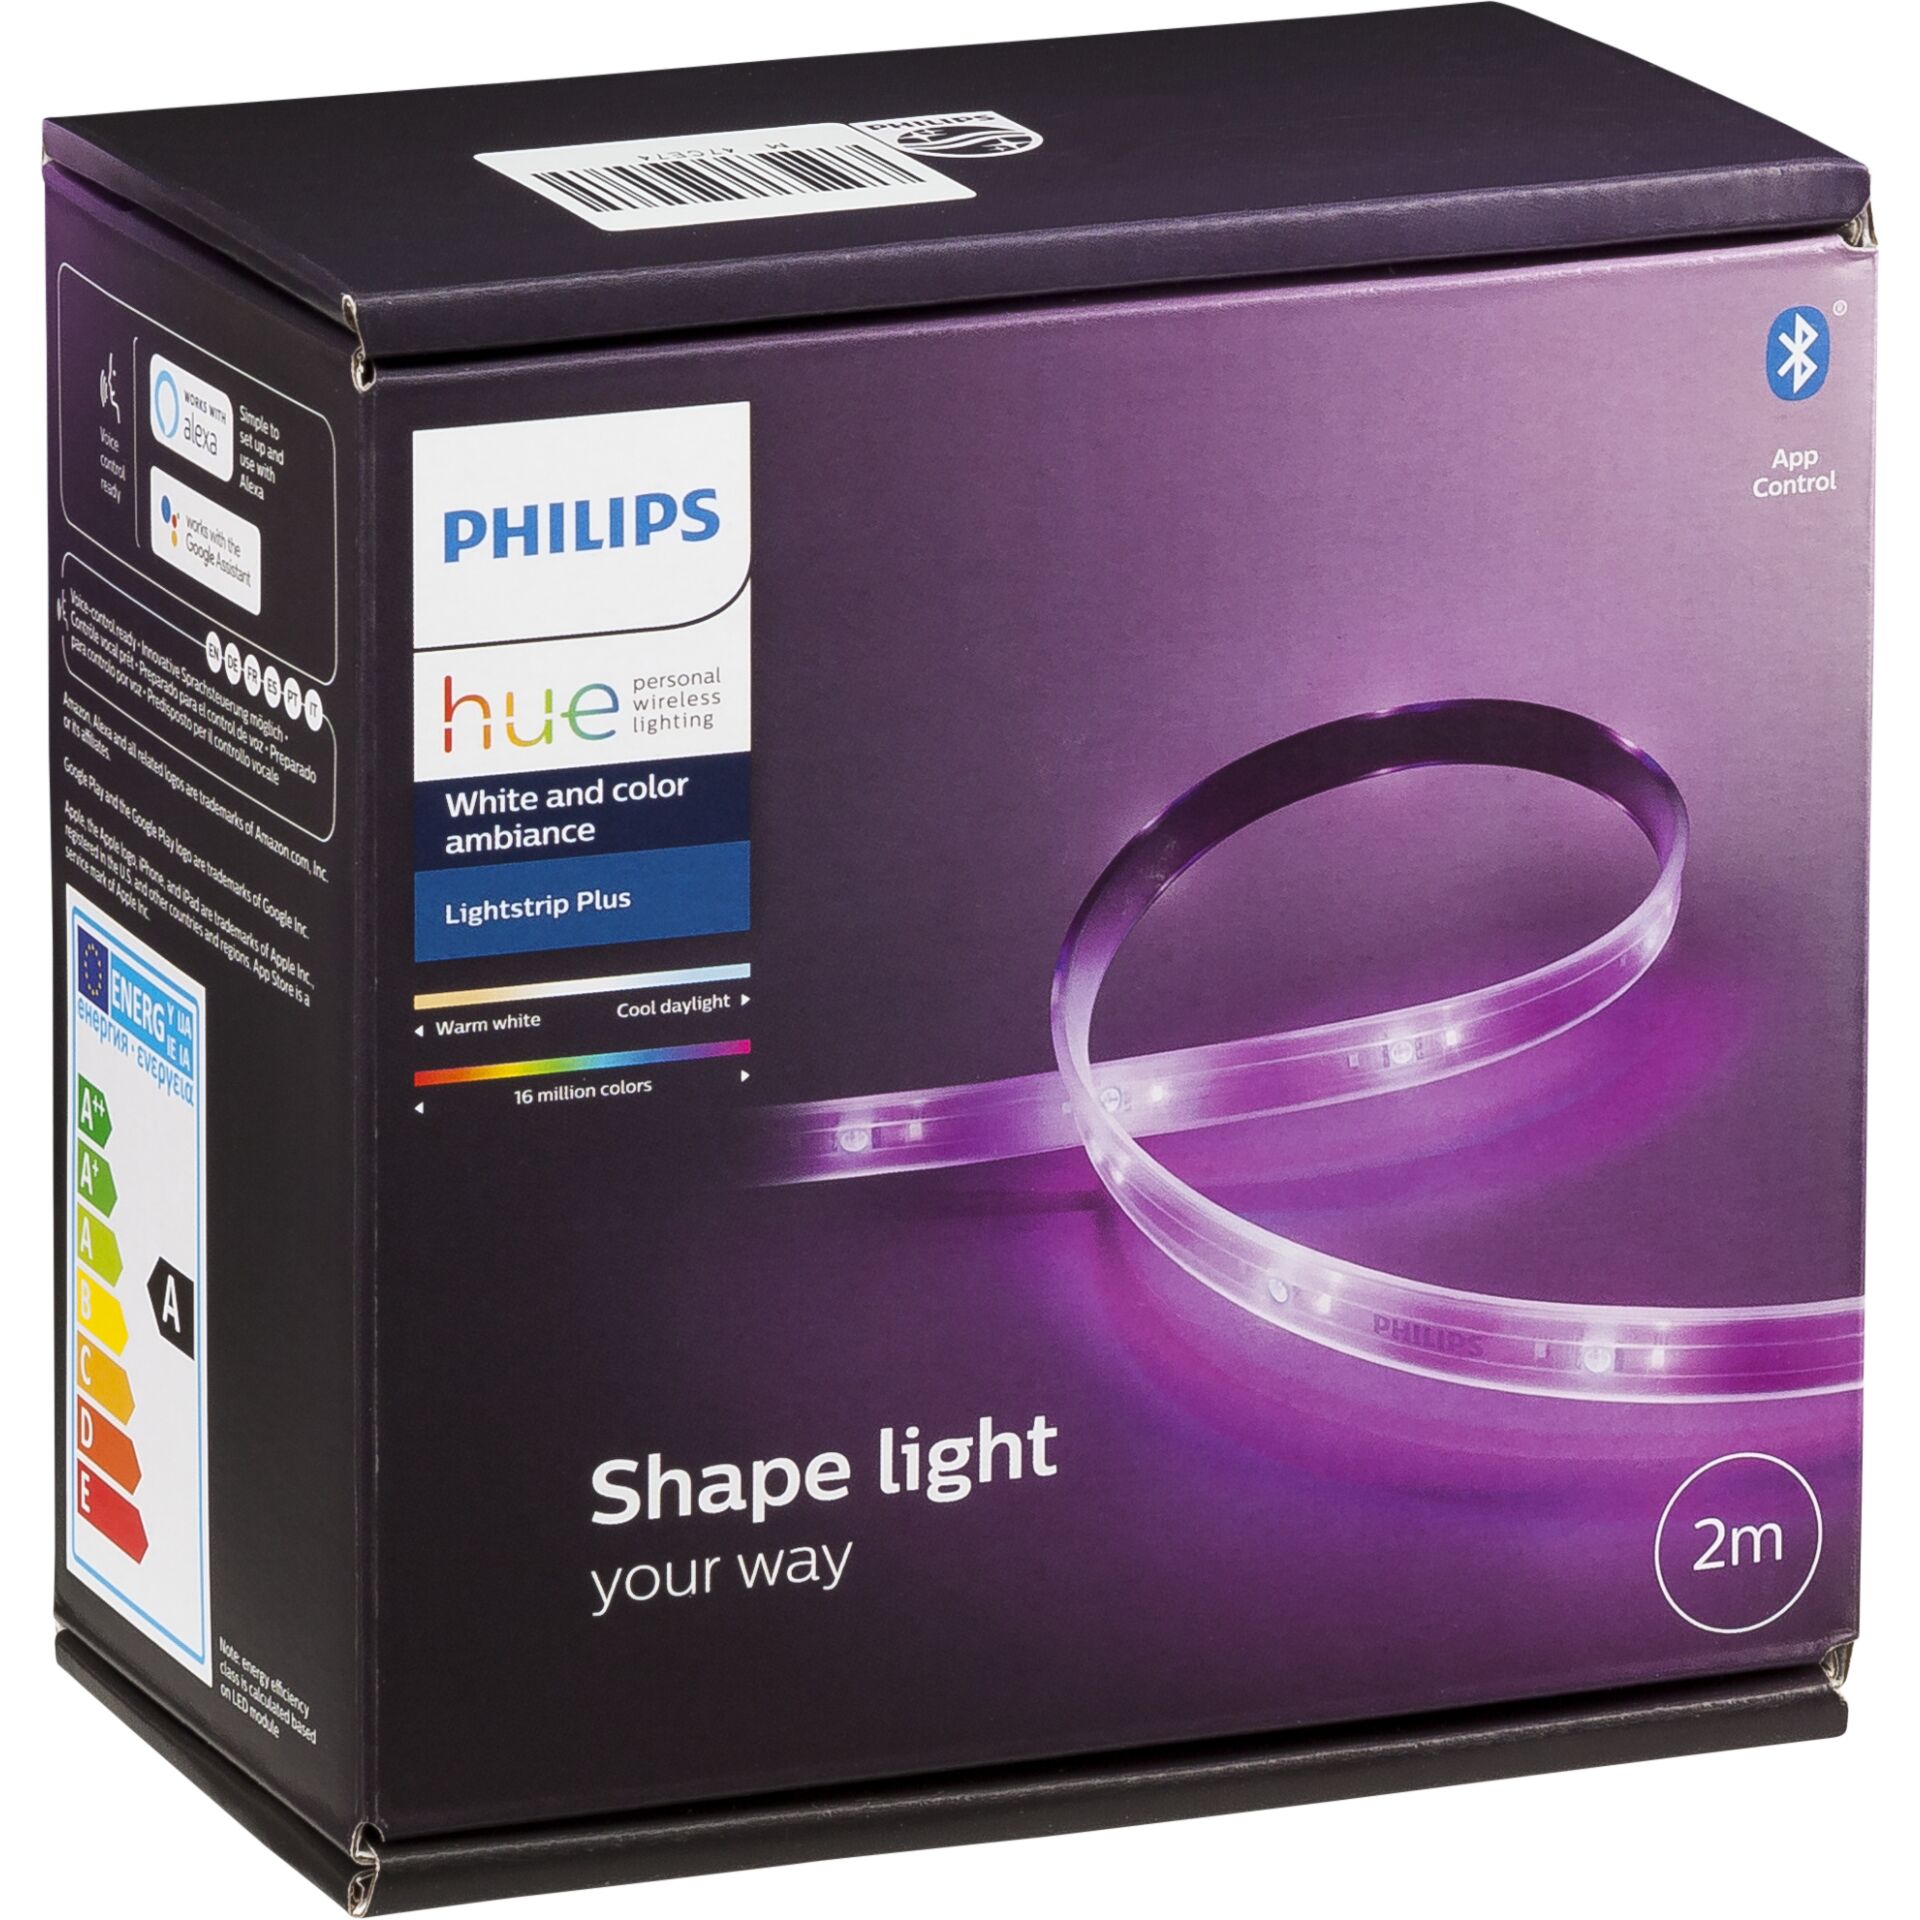 Philips Hue LightStrip Plus 2m 1600lm White Color Ambiance B